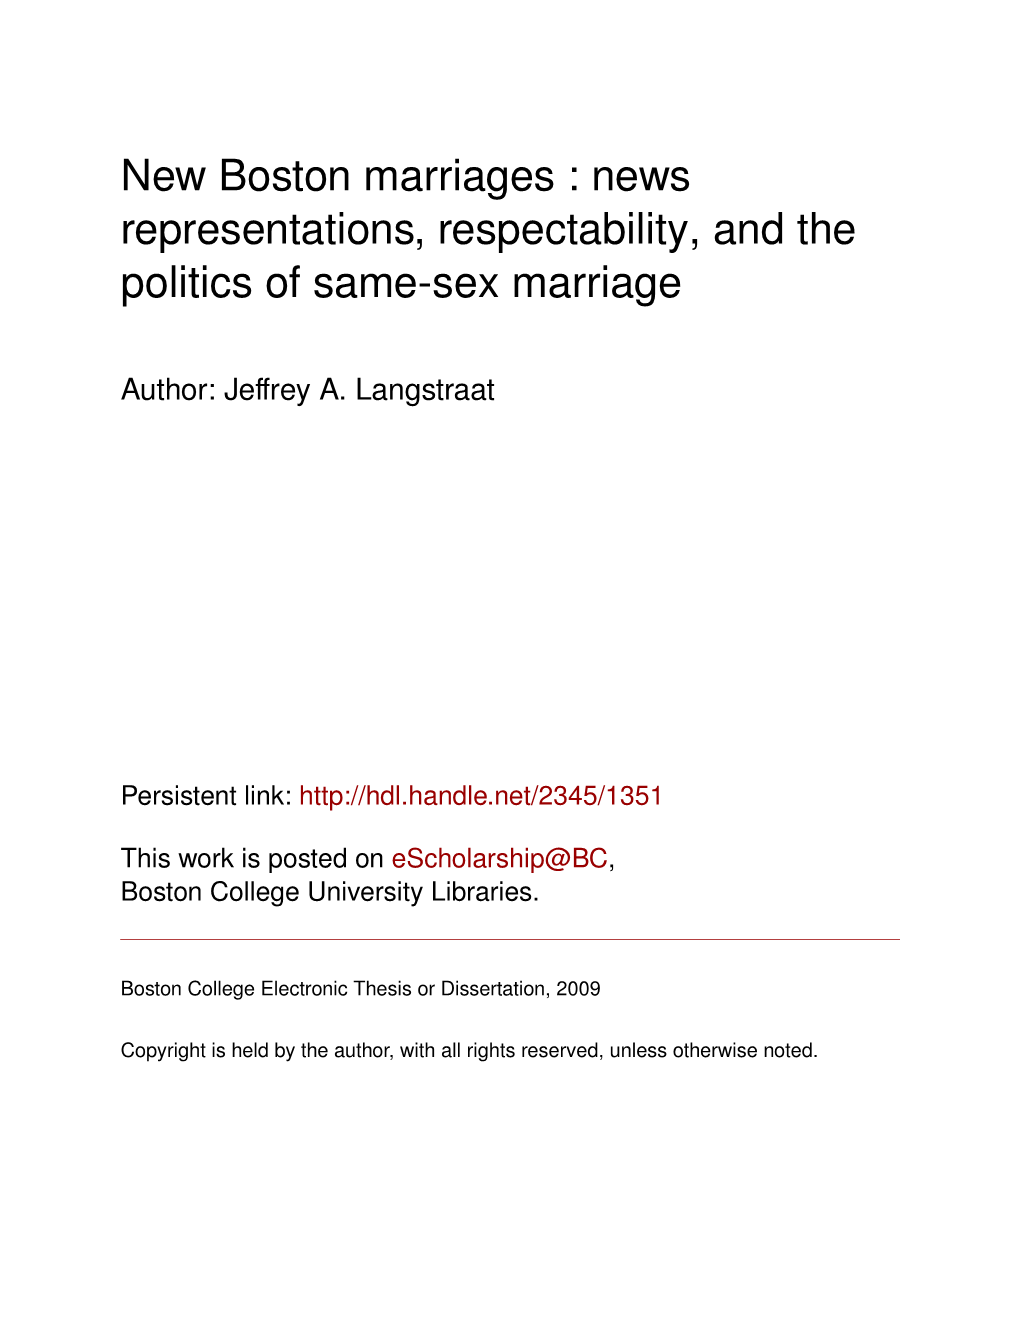 New Boston Marriages : News Representations, Respectability, and the Politics of Same-Sex Marriage